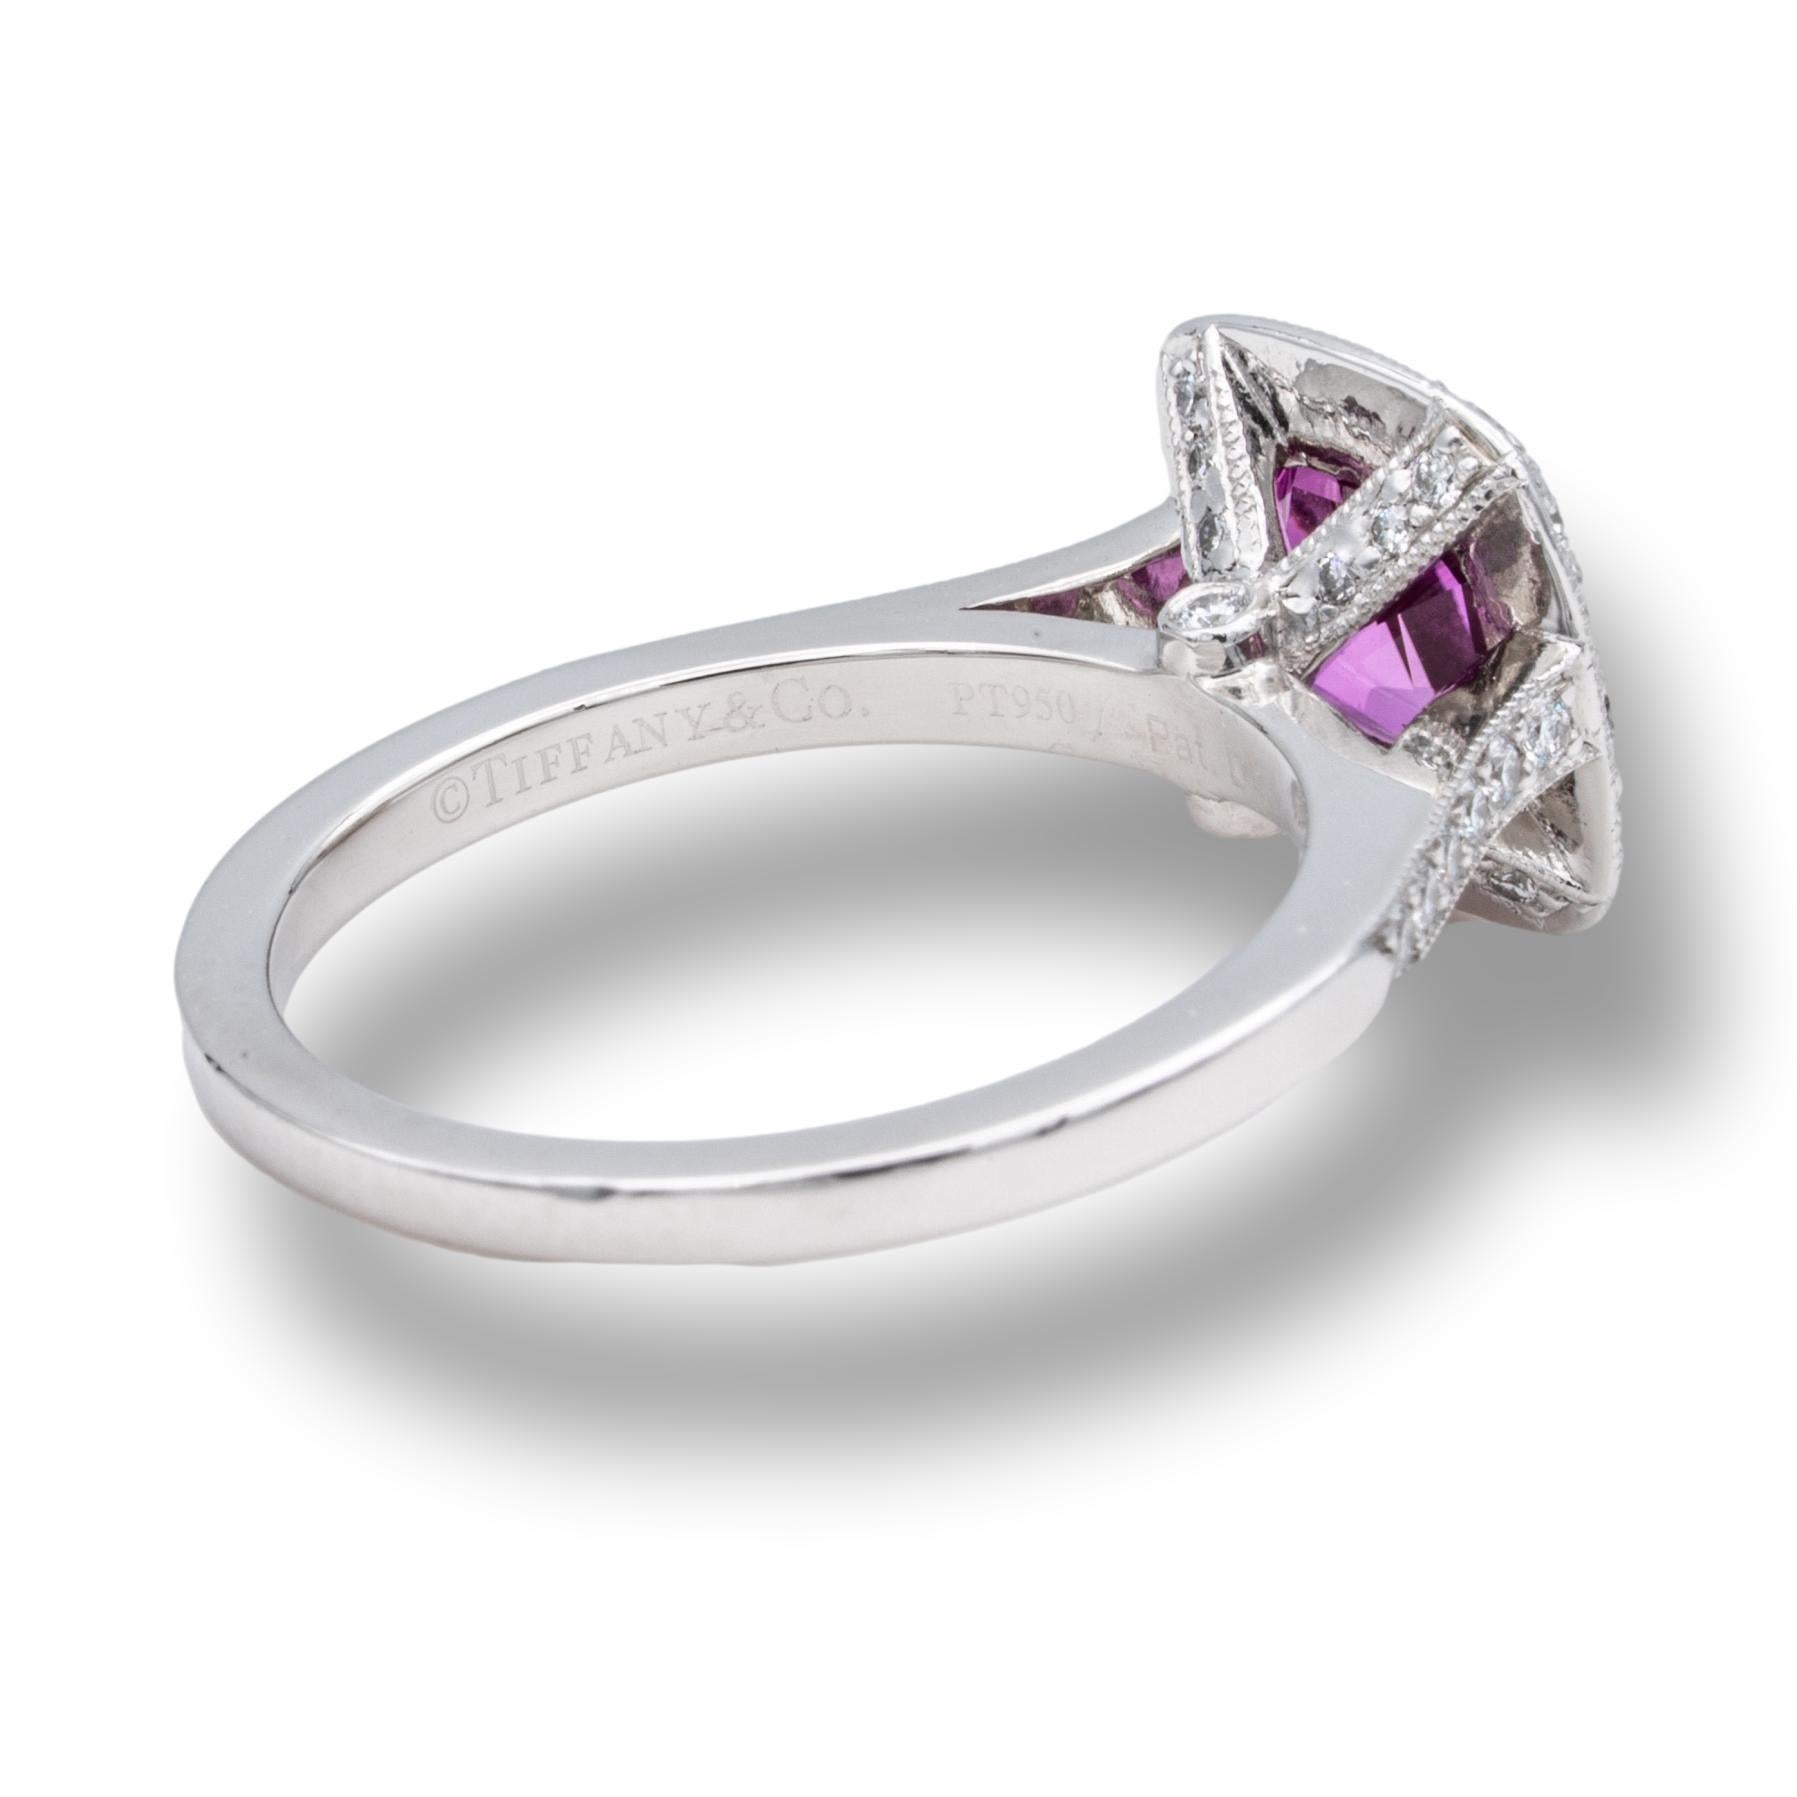 Tiffany & Co Cushion Brilliant Engagement Ring from the “Legacy” collection featuring a 1.51 carat rich color pink sapphire center finely crafted in Platinum surrounded by dazzling bead-set diamonds in a full bezel millgrain design halo and half-way